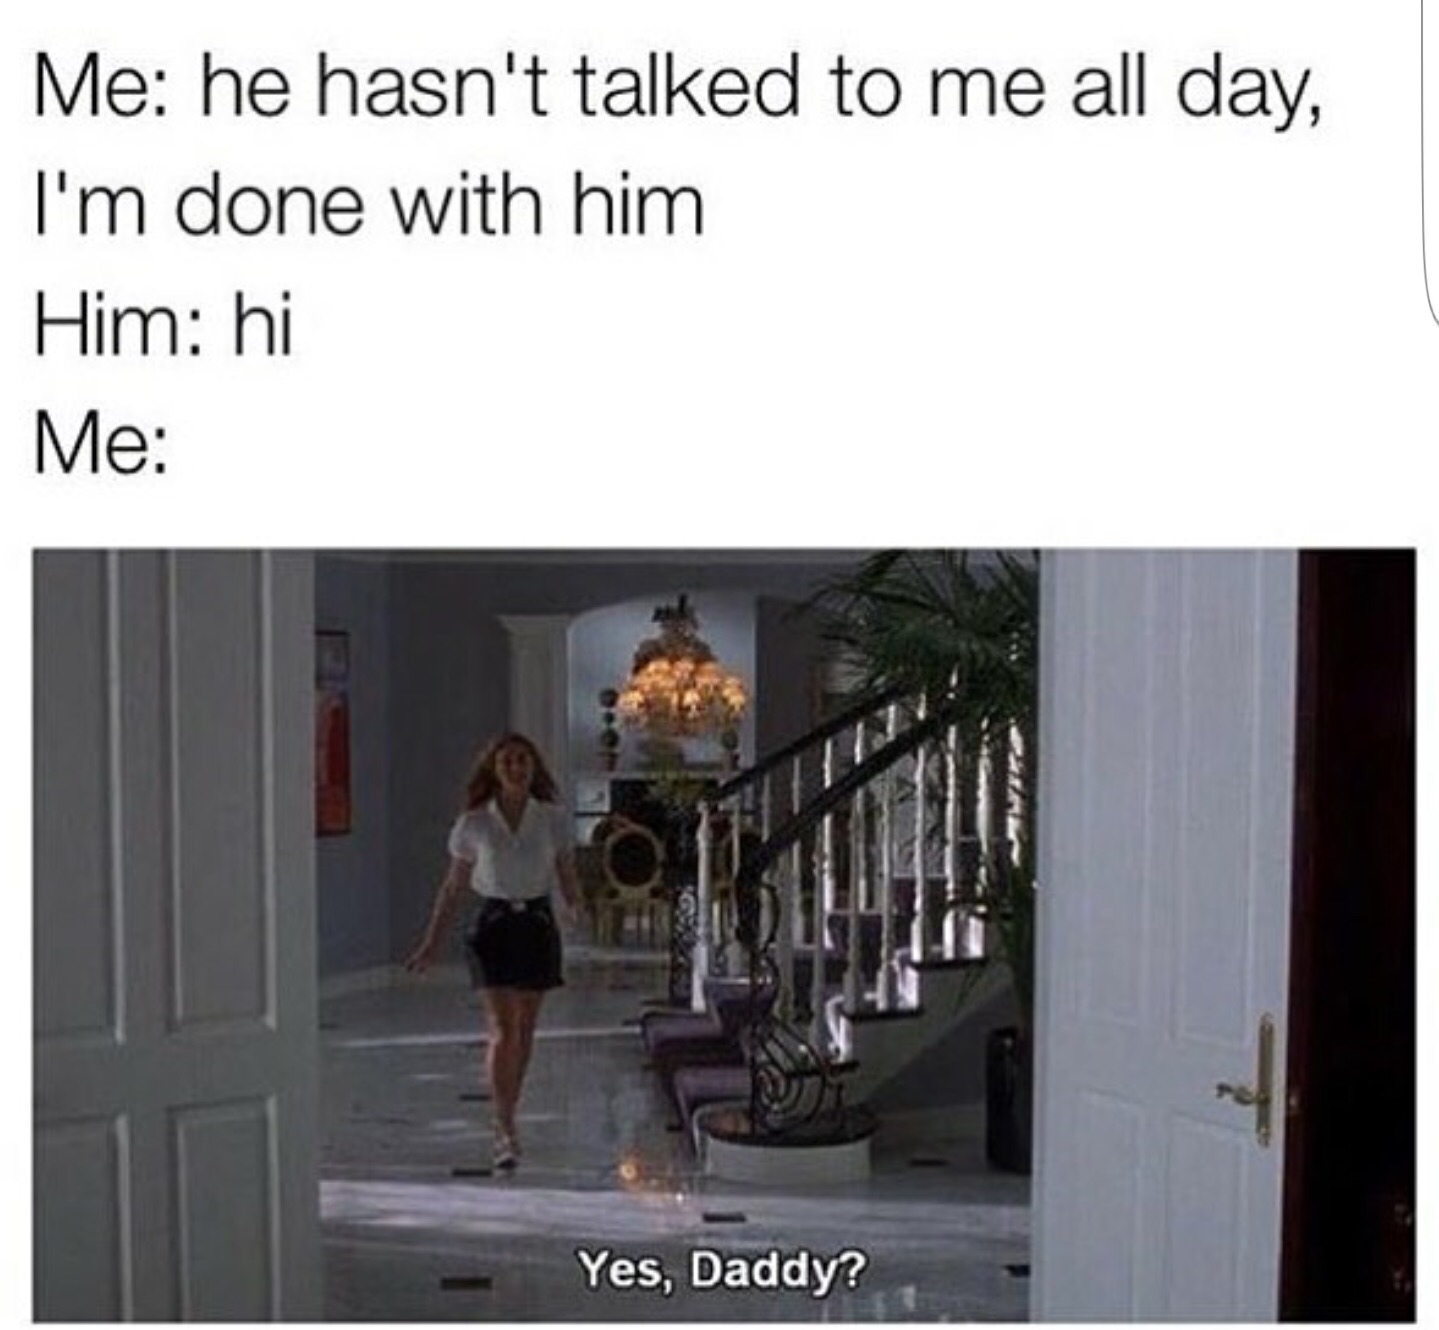 i m not going back to him meme - Me he hasn't talked to me all day, I'm done with him Him hi Me Yes, Daddy?